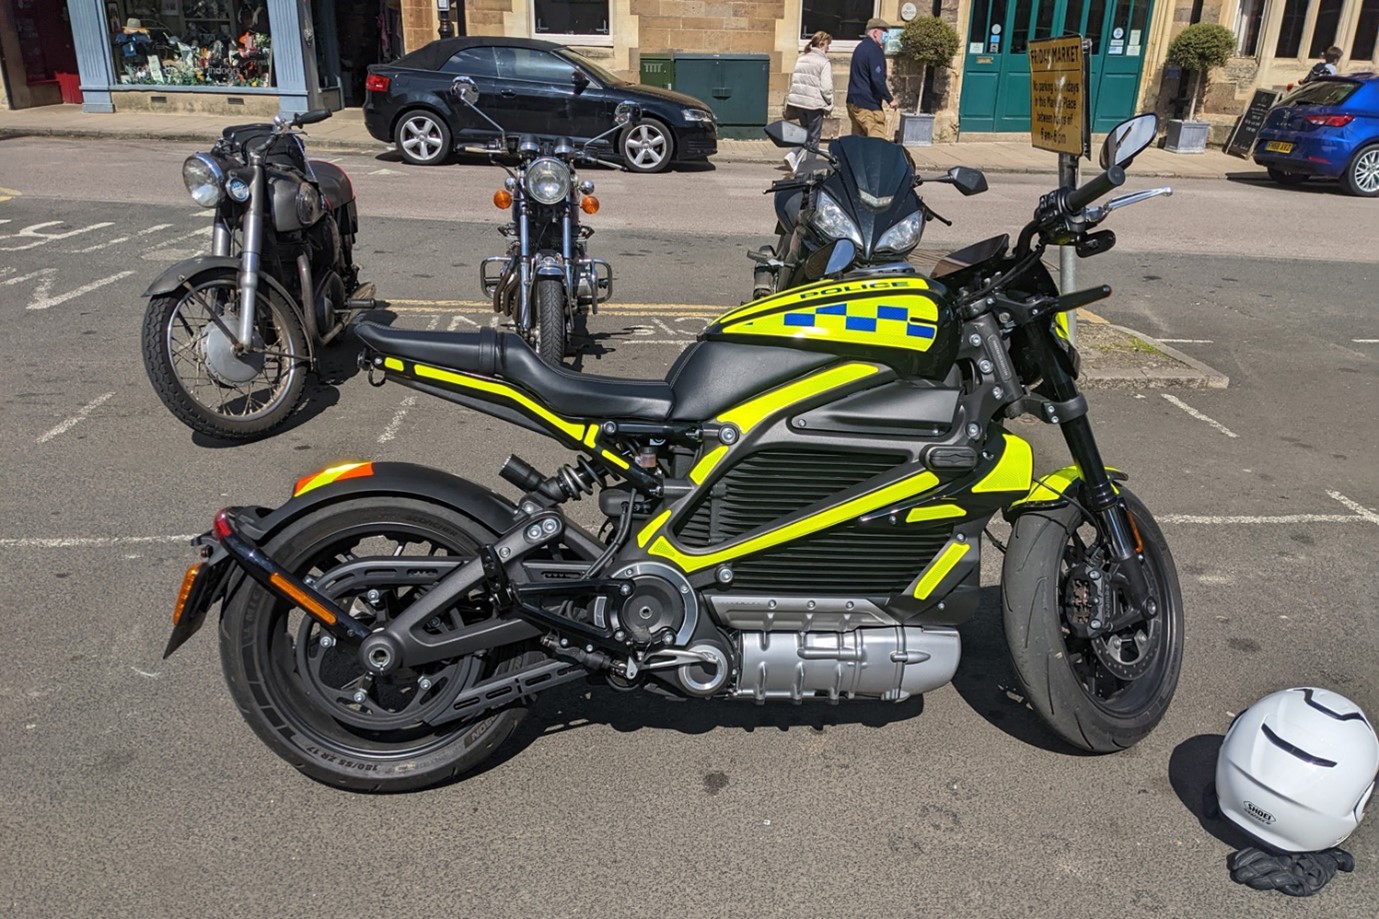 LiveWire electric motorcycle insured and used by police